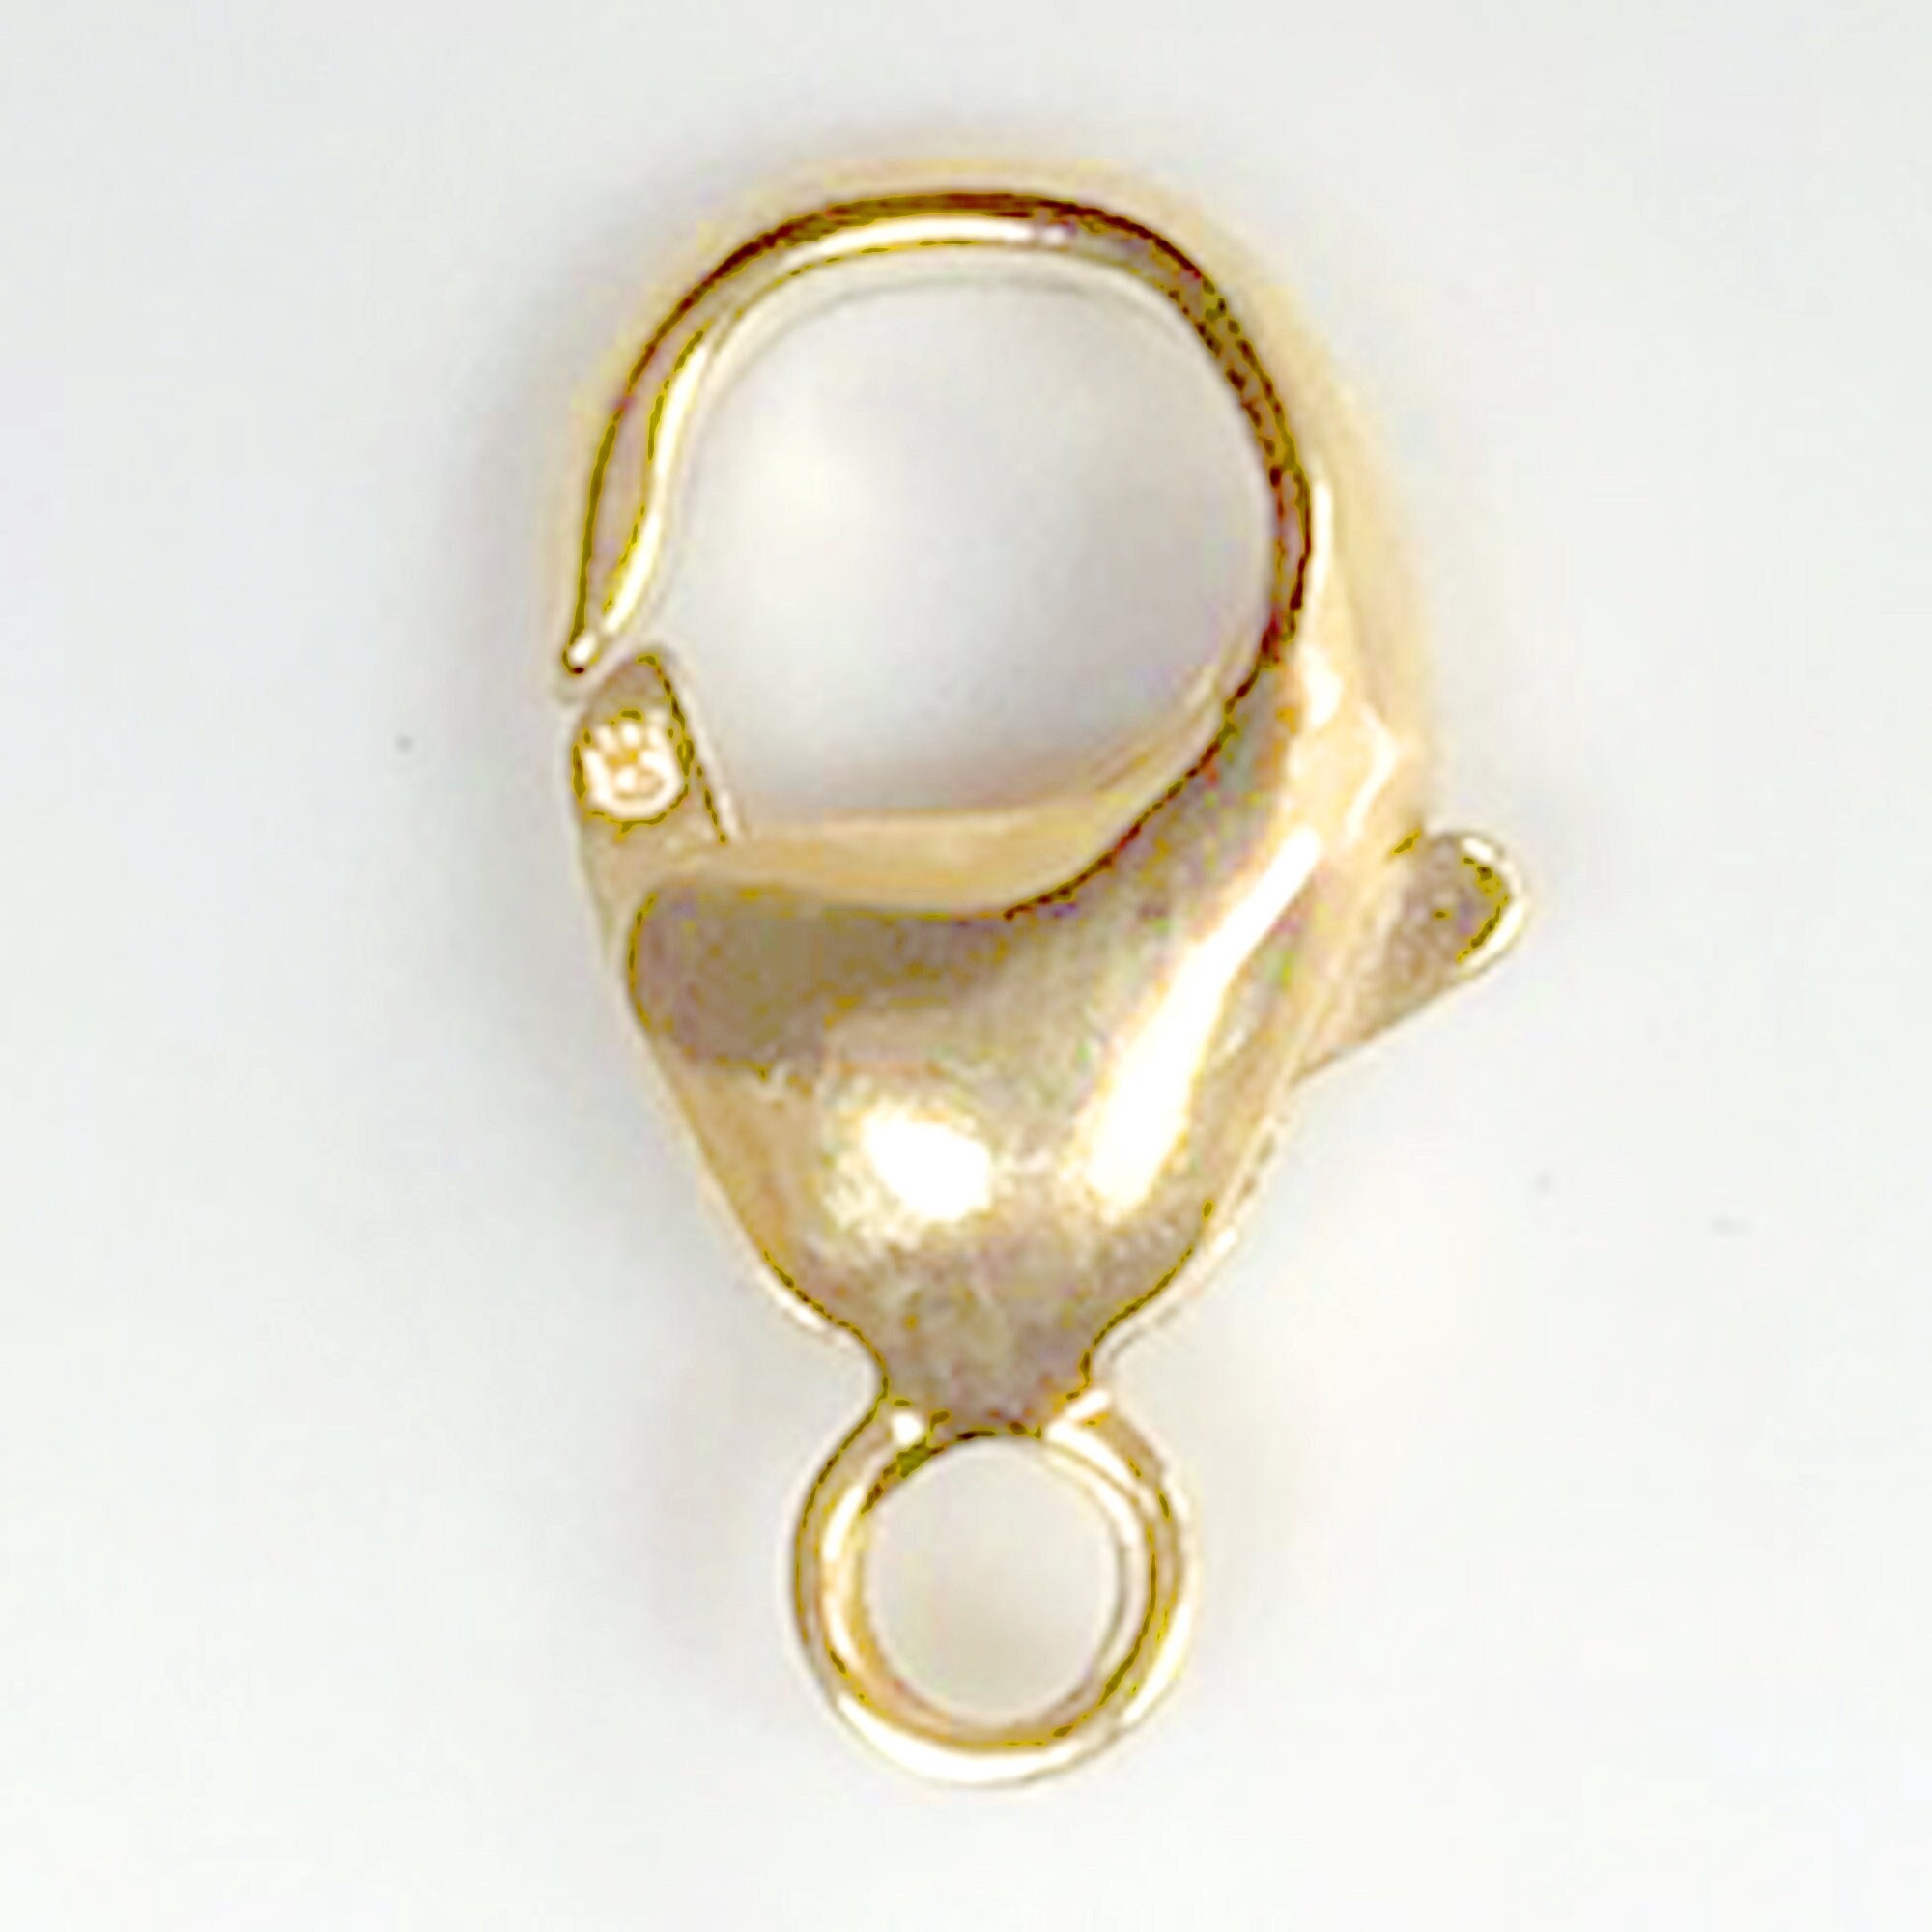 14k gold filled lobster clasp 4.5x12mm x 1pc